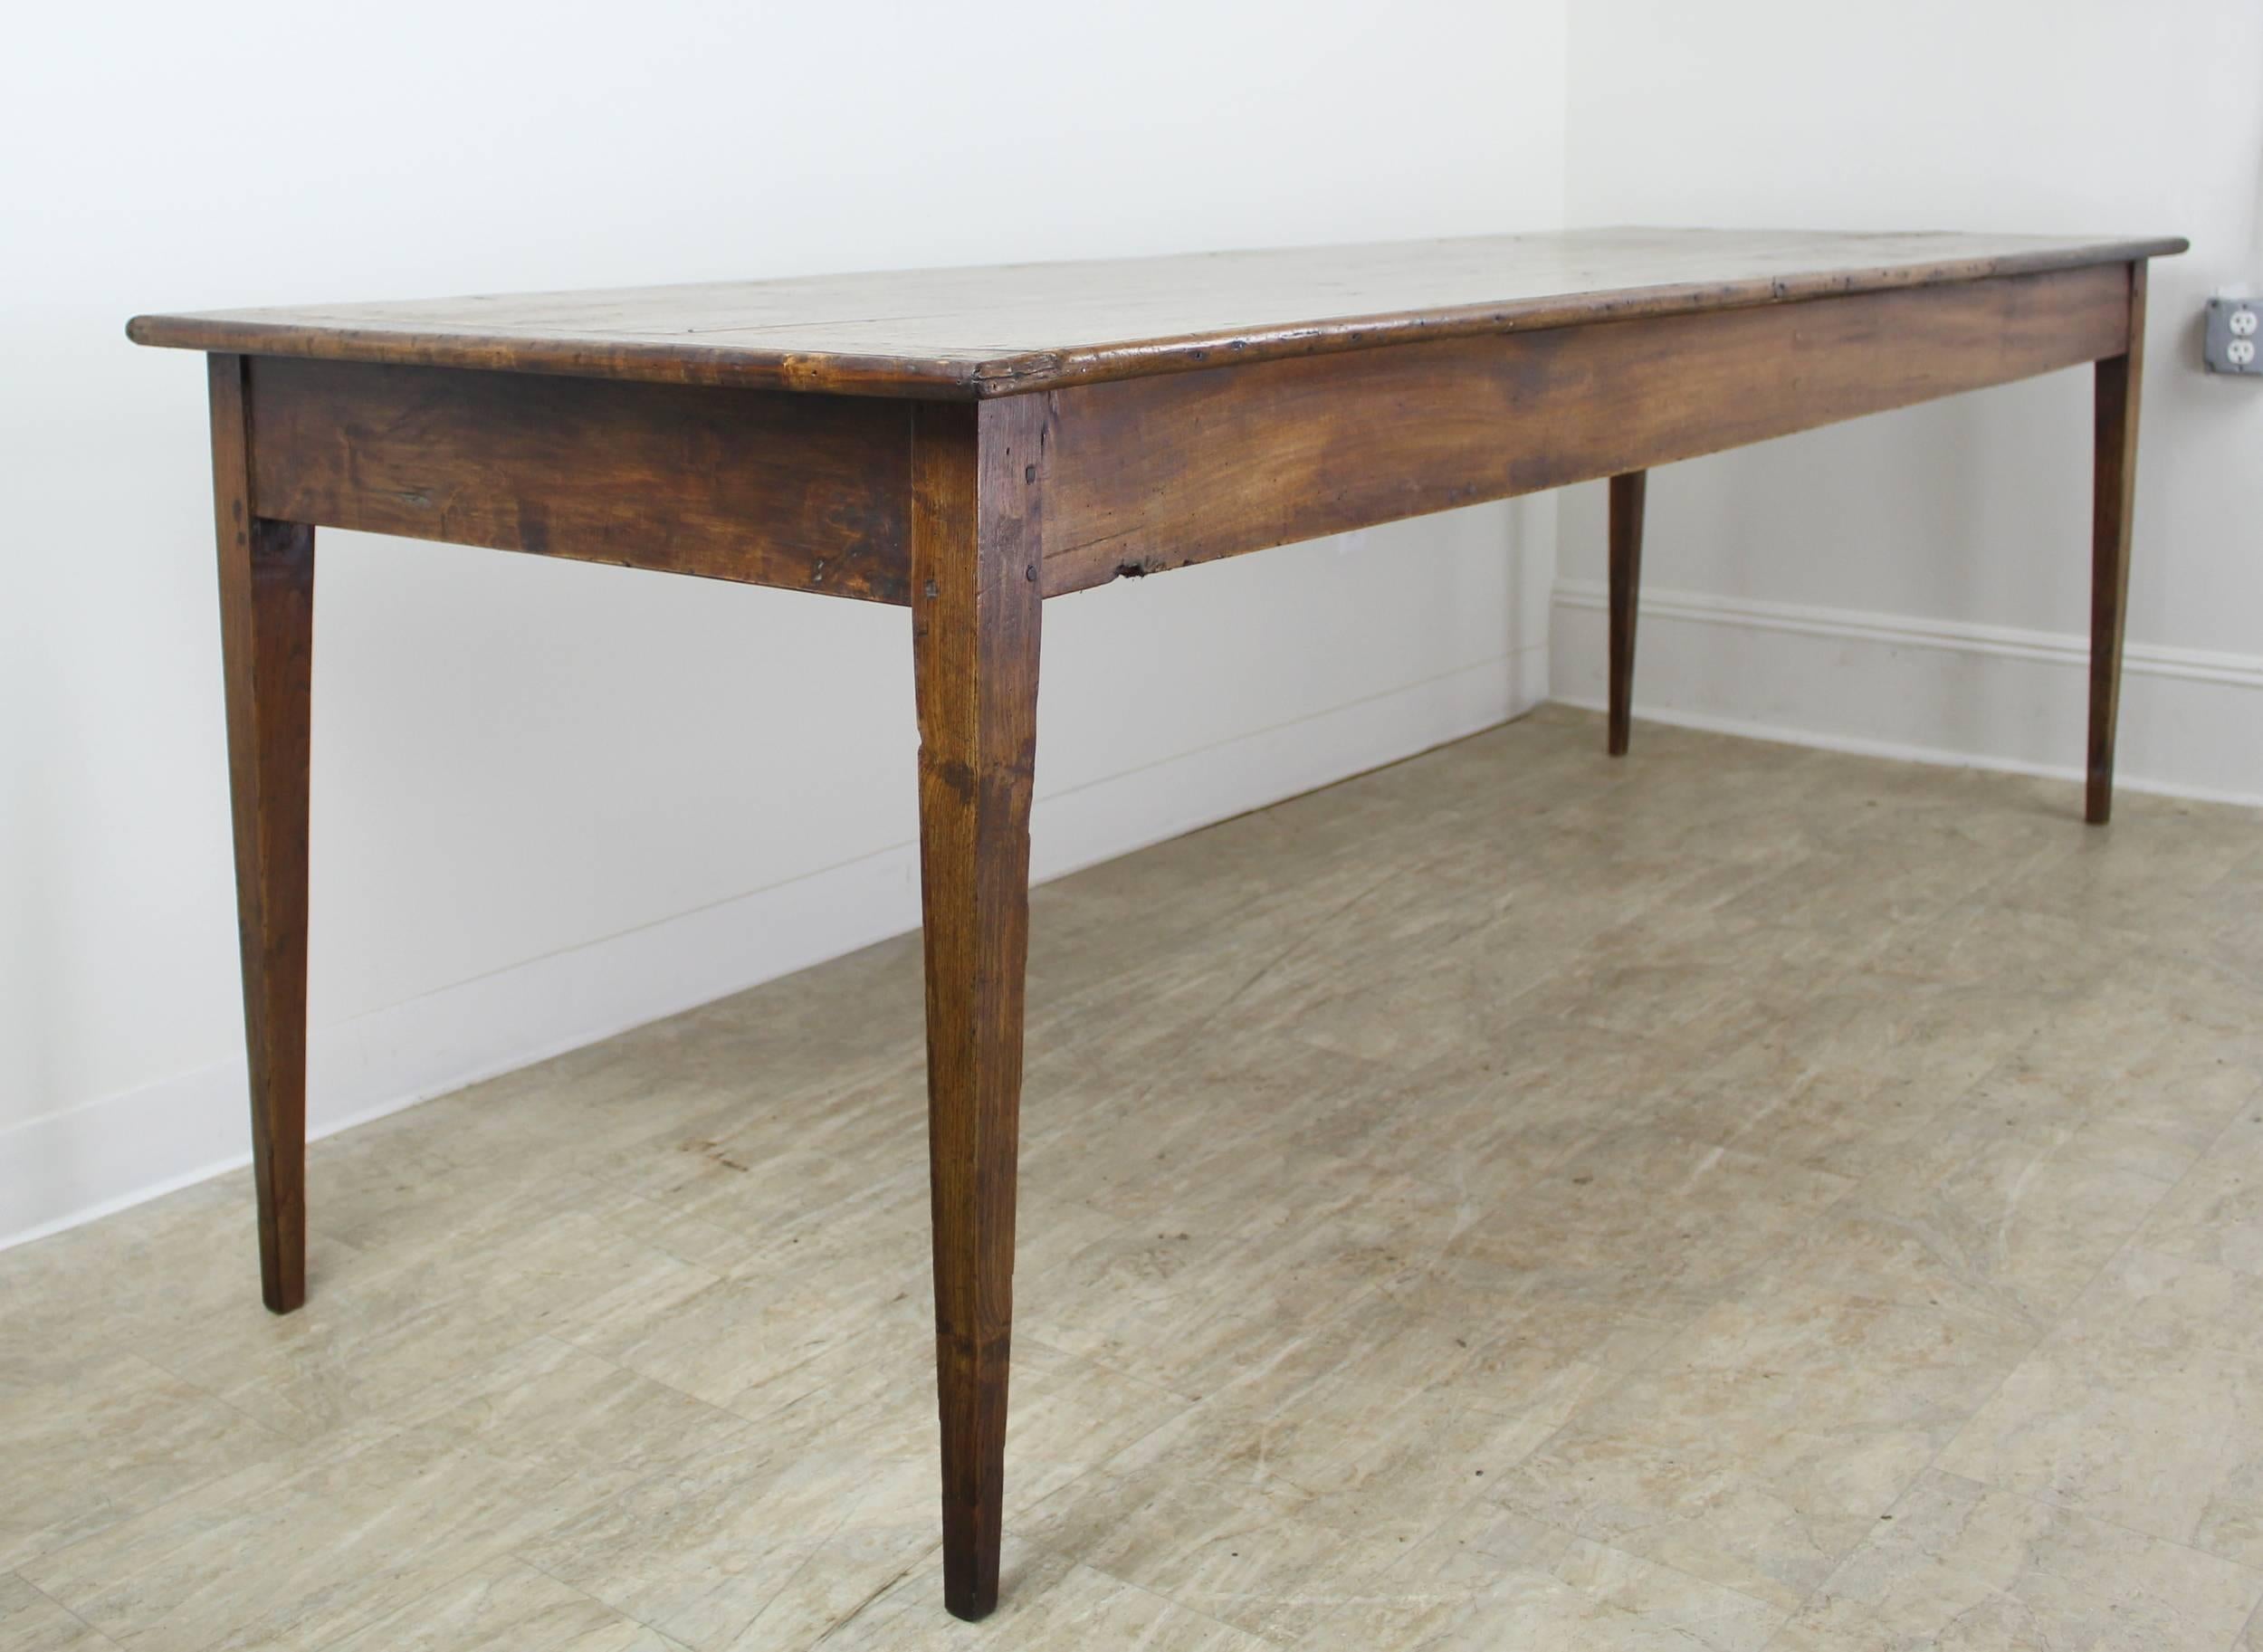 A long beautifully grained and colored antique poplar farm table from France. Rich patina and natural grain and knotholes elevate this country piece of furniture to art! Thin tapered legs and a high apron height of 25 inches creates a particularly